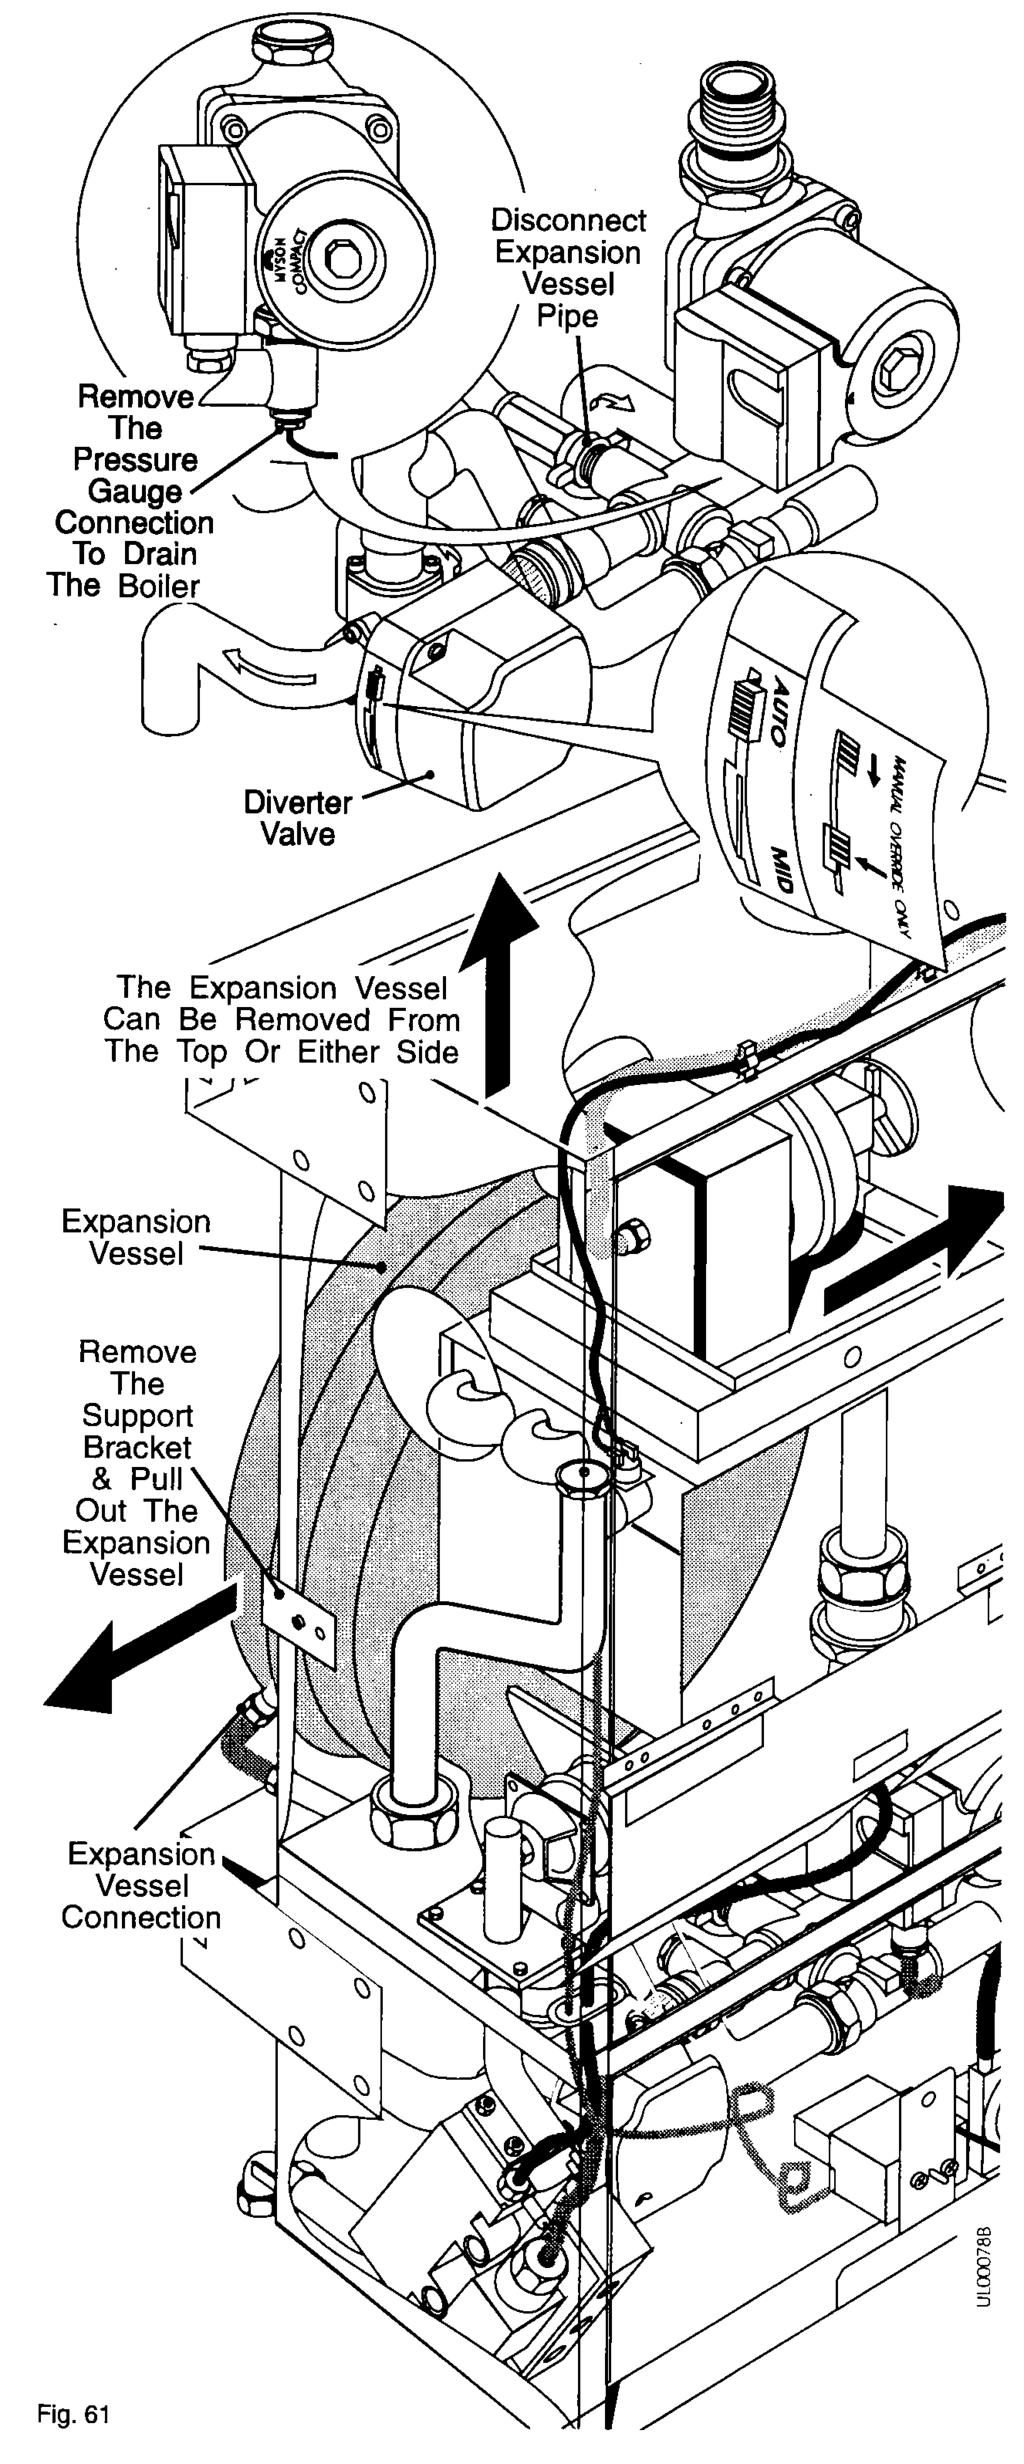 Replacement of Parts - Page 50 6.21 Expansion Vessel Depending on ease of access, the expansion vessel can be removed from the left, right or from above the boiler.